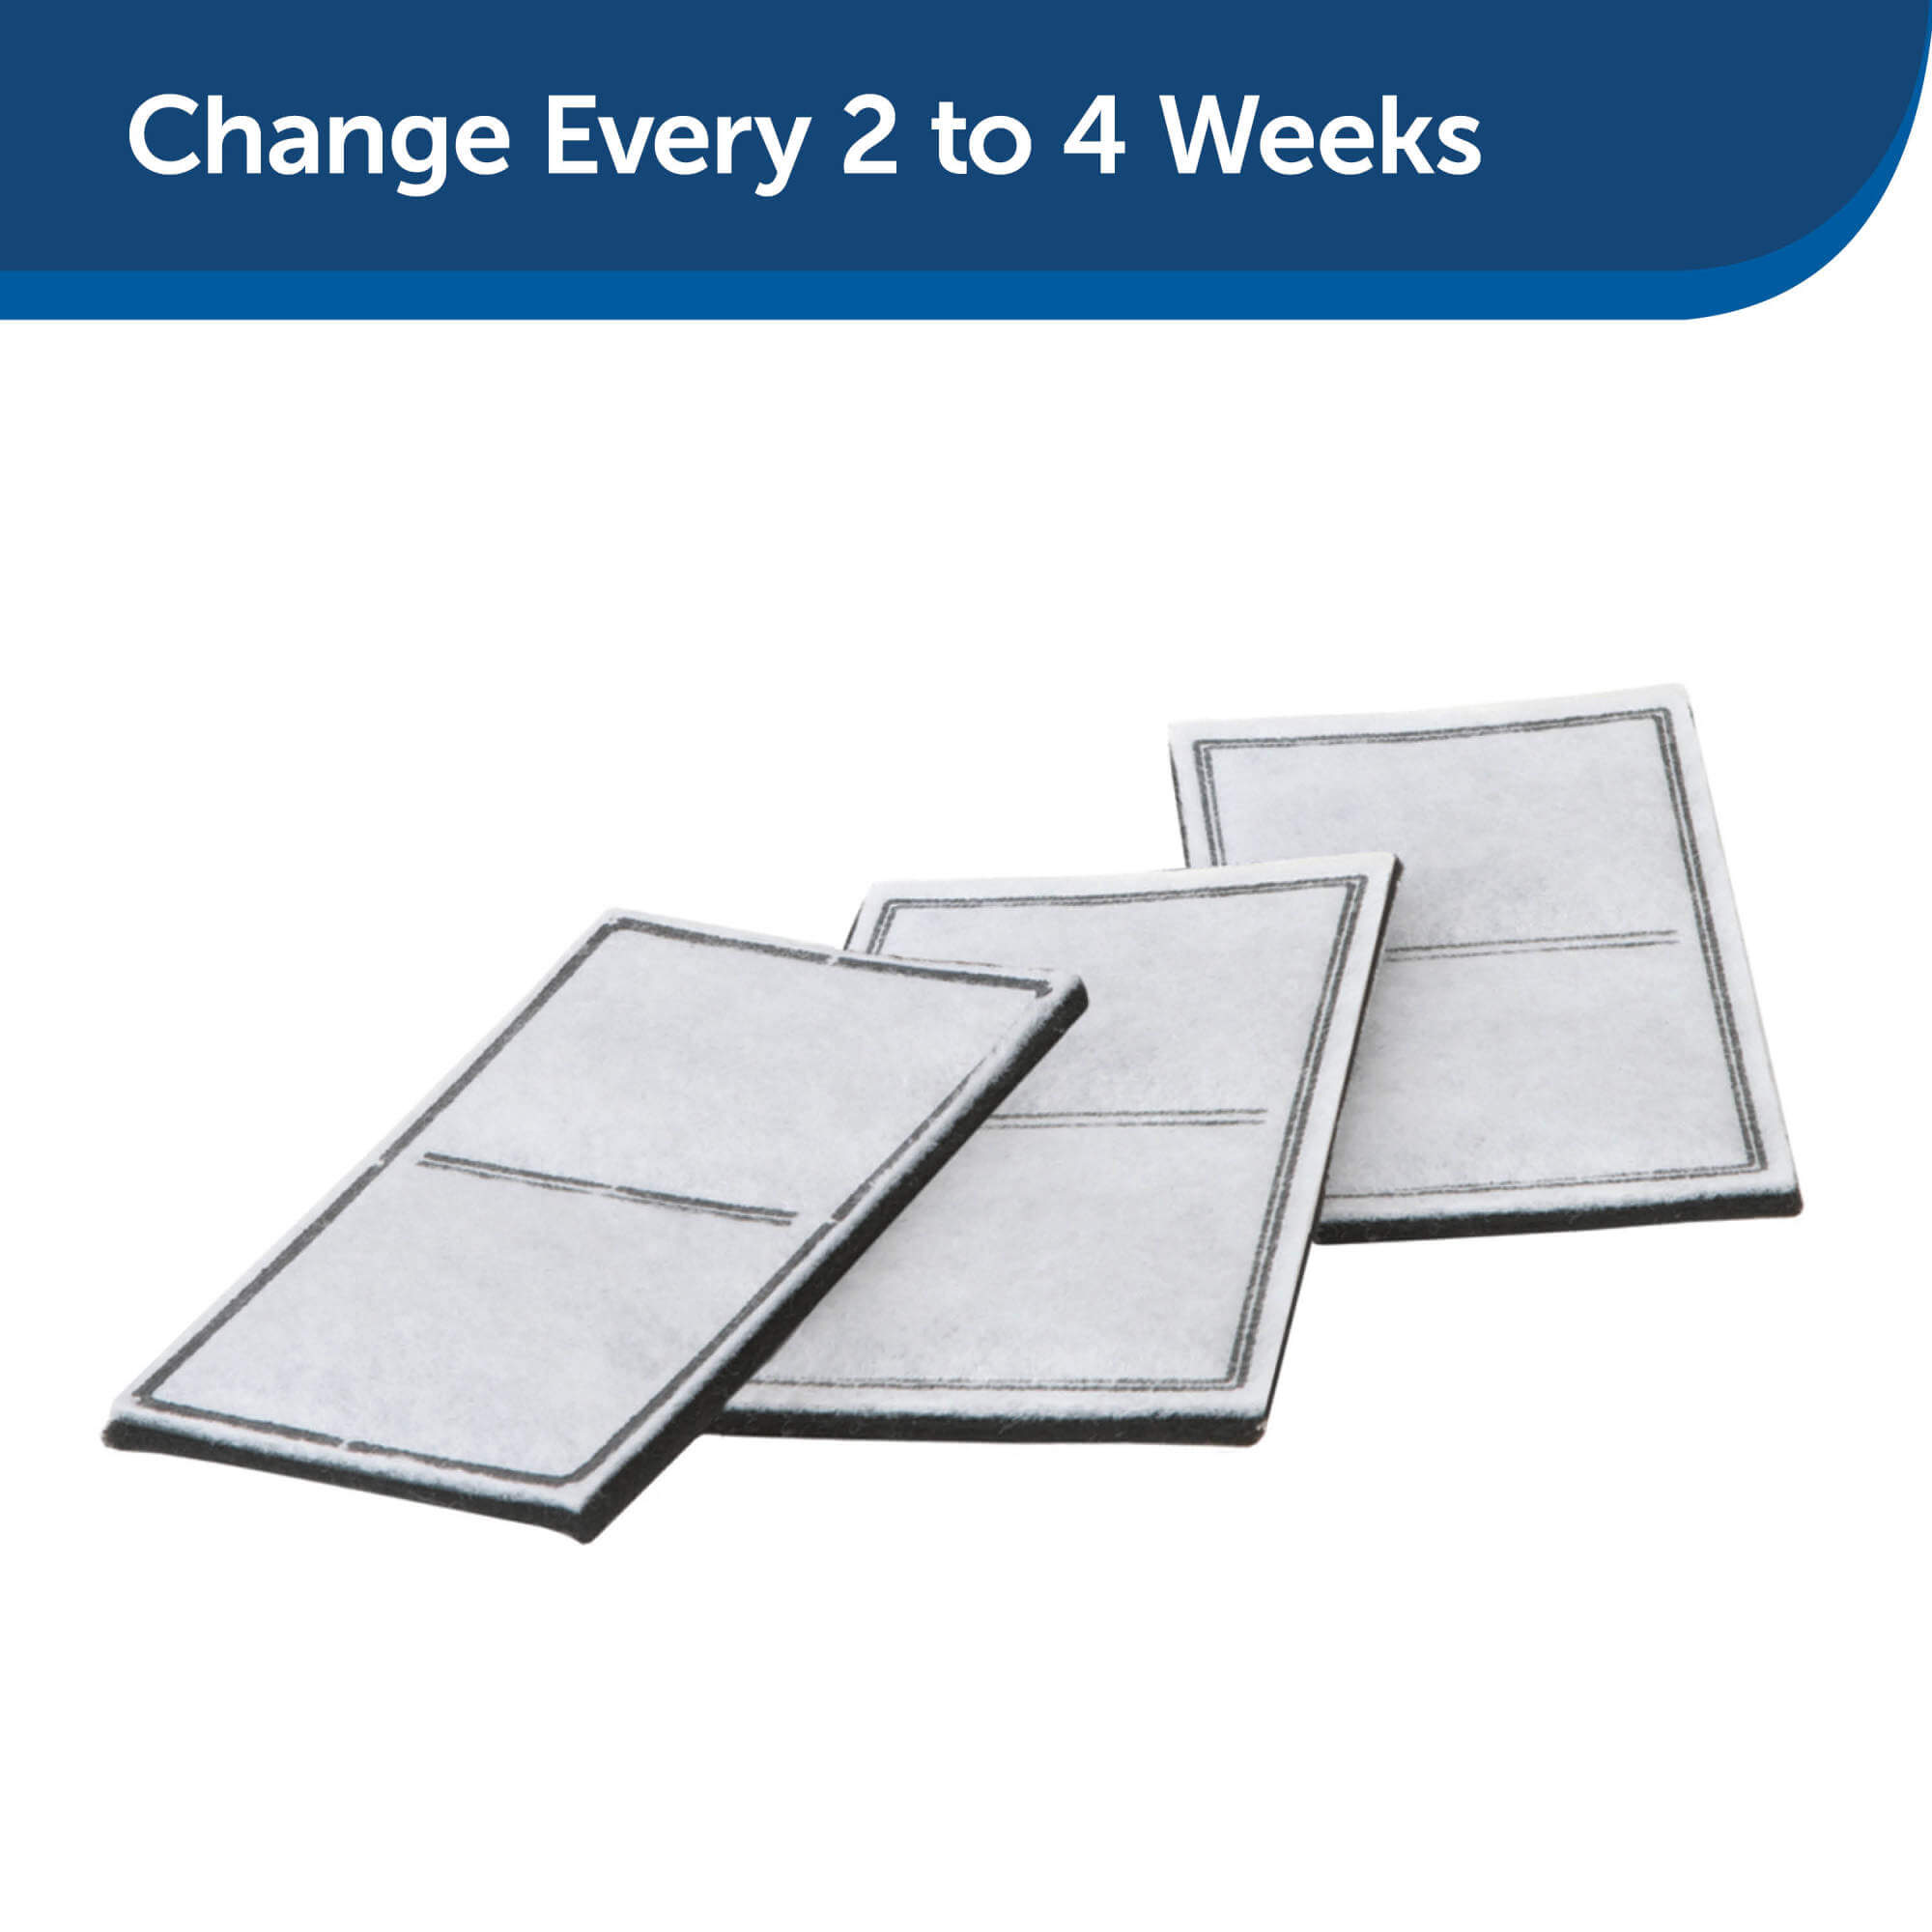 Change Drinkwell filter every 2 to 4 weeks